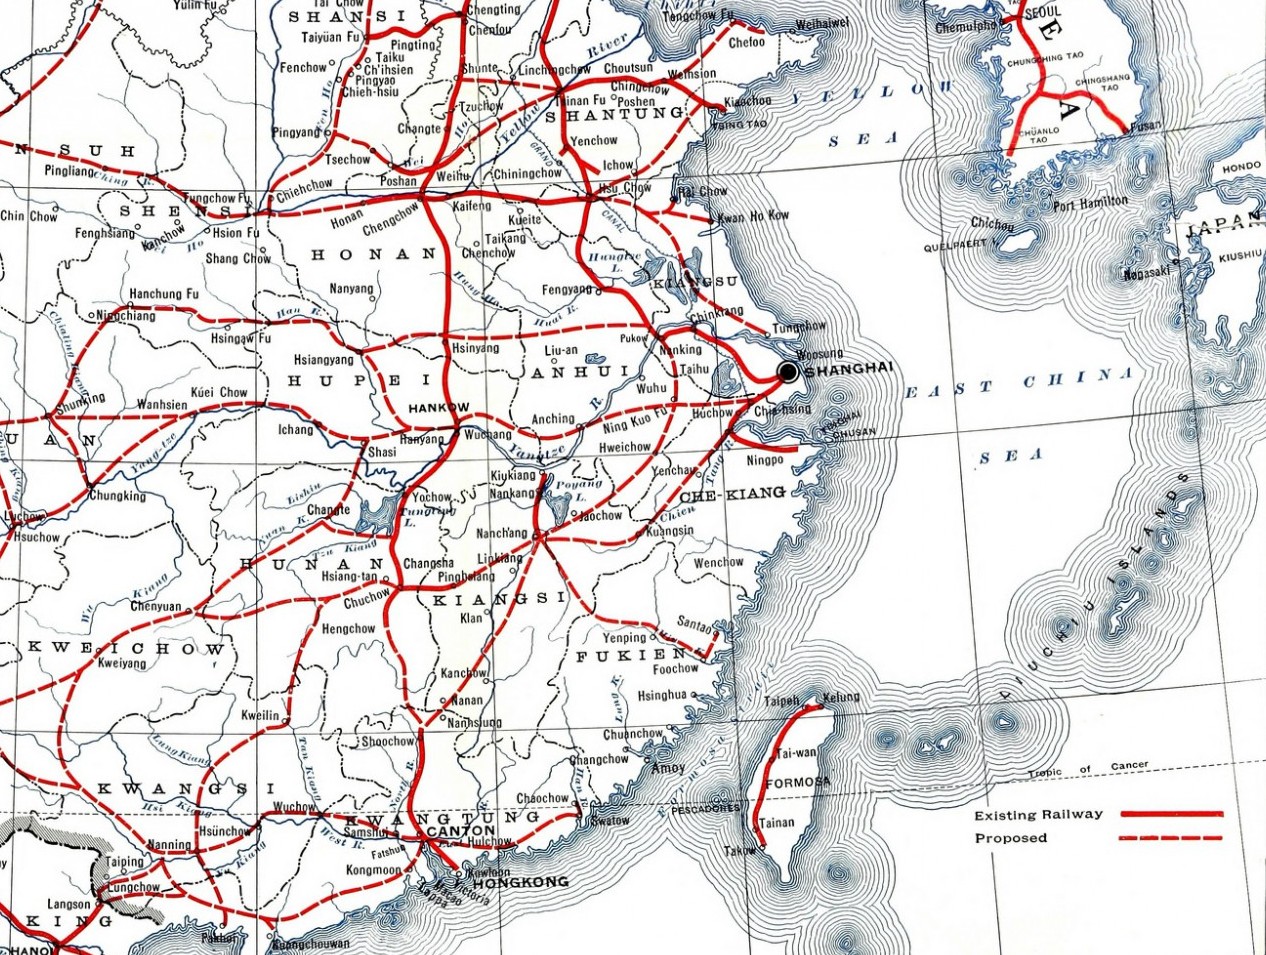 Railway Map of China, 1918. Source: Flickr, No known copyright restrictions.